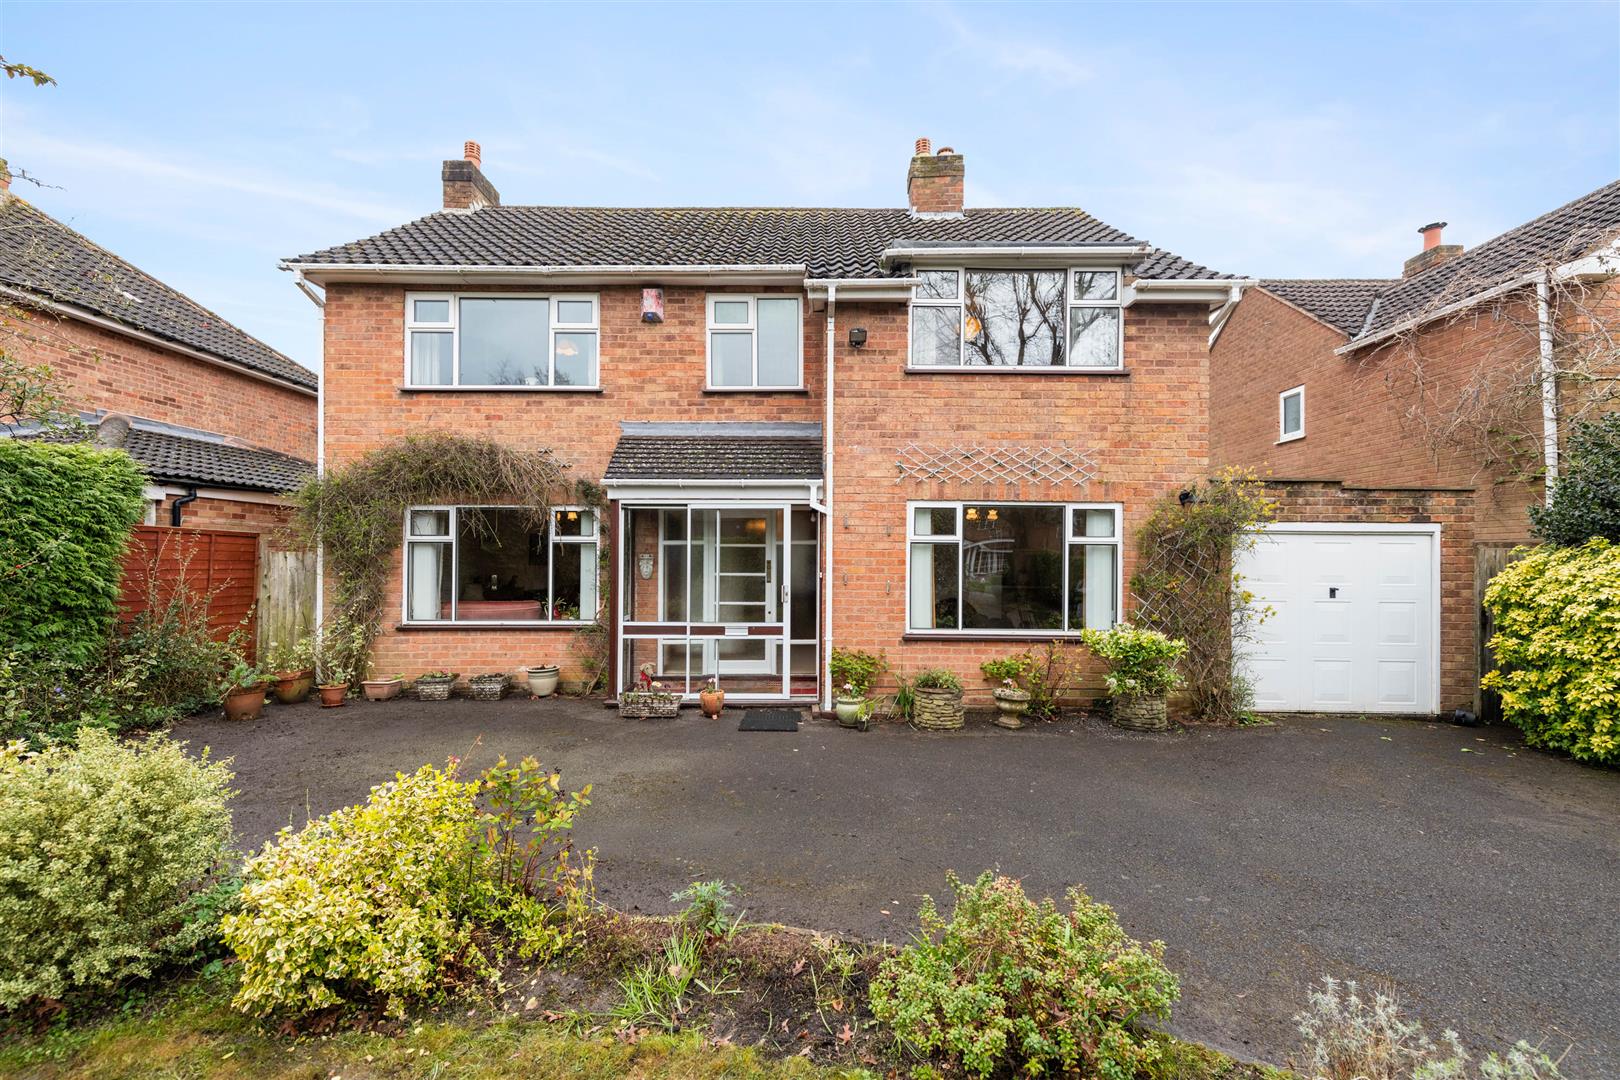 4 bed detached house for sale in Broad Lane, Solihull  - Property Image 1